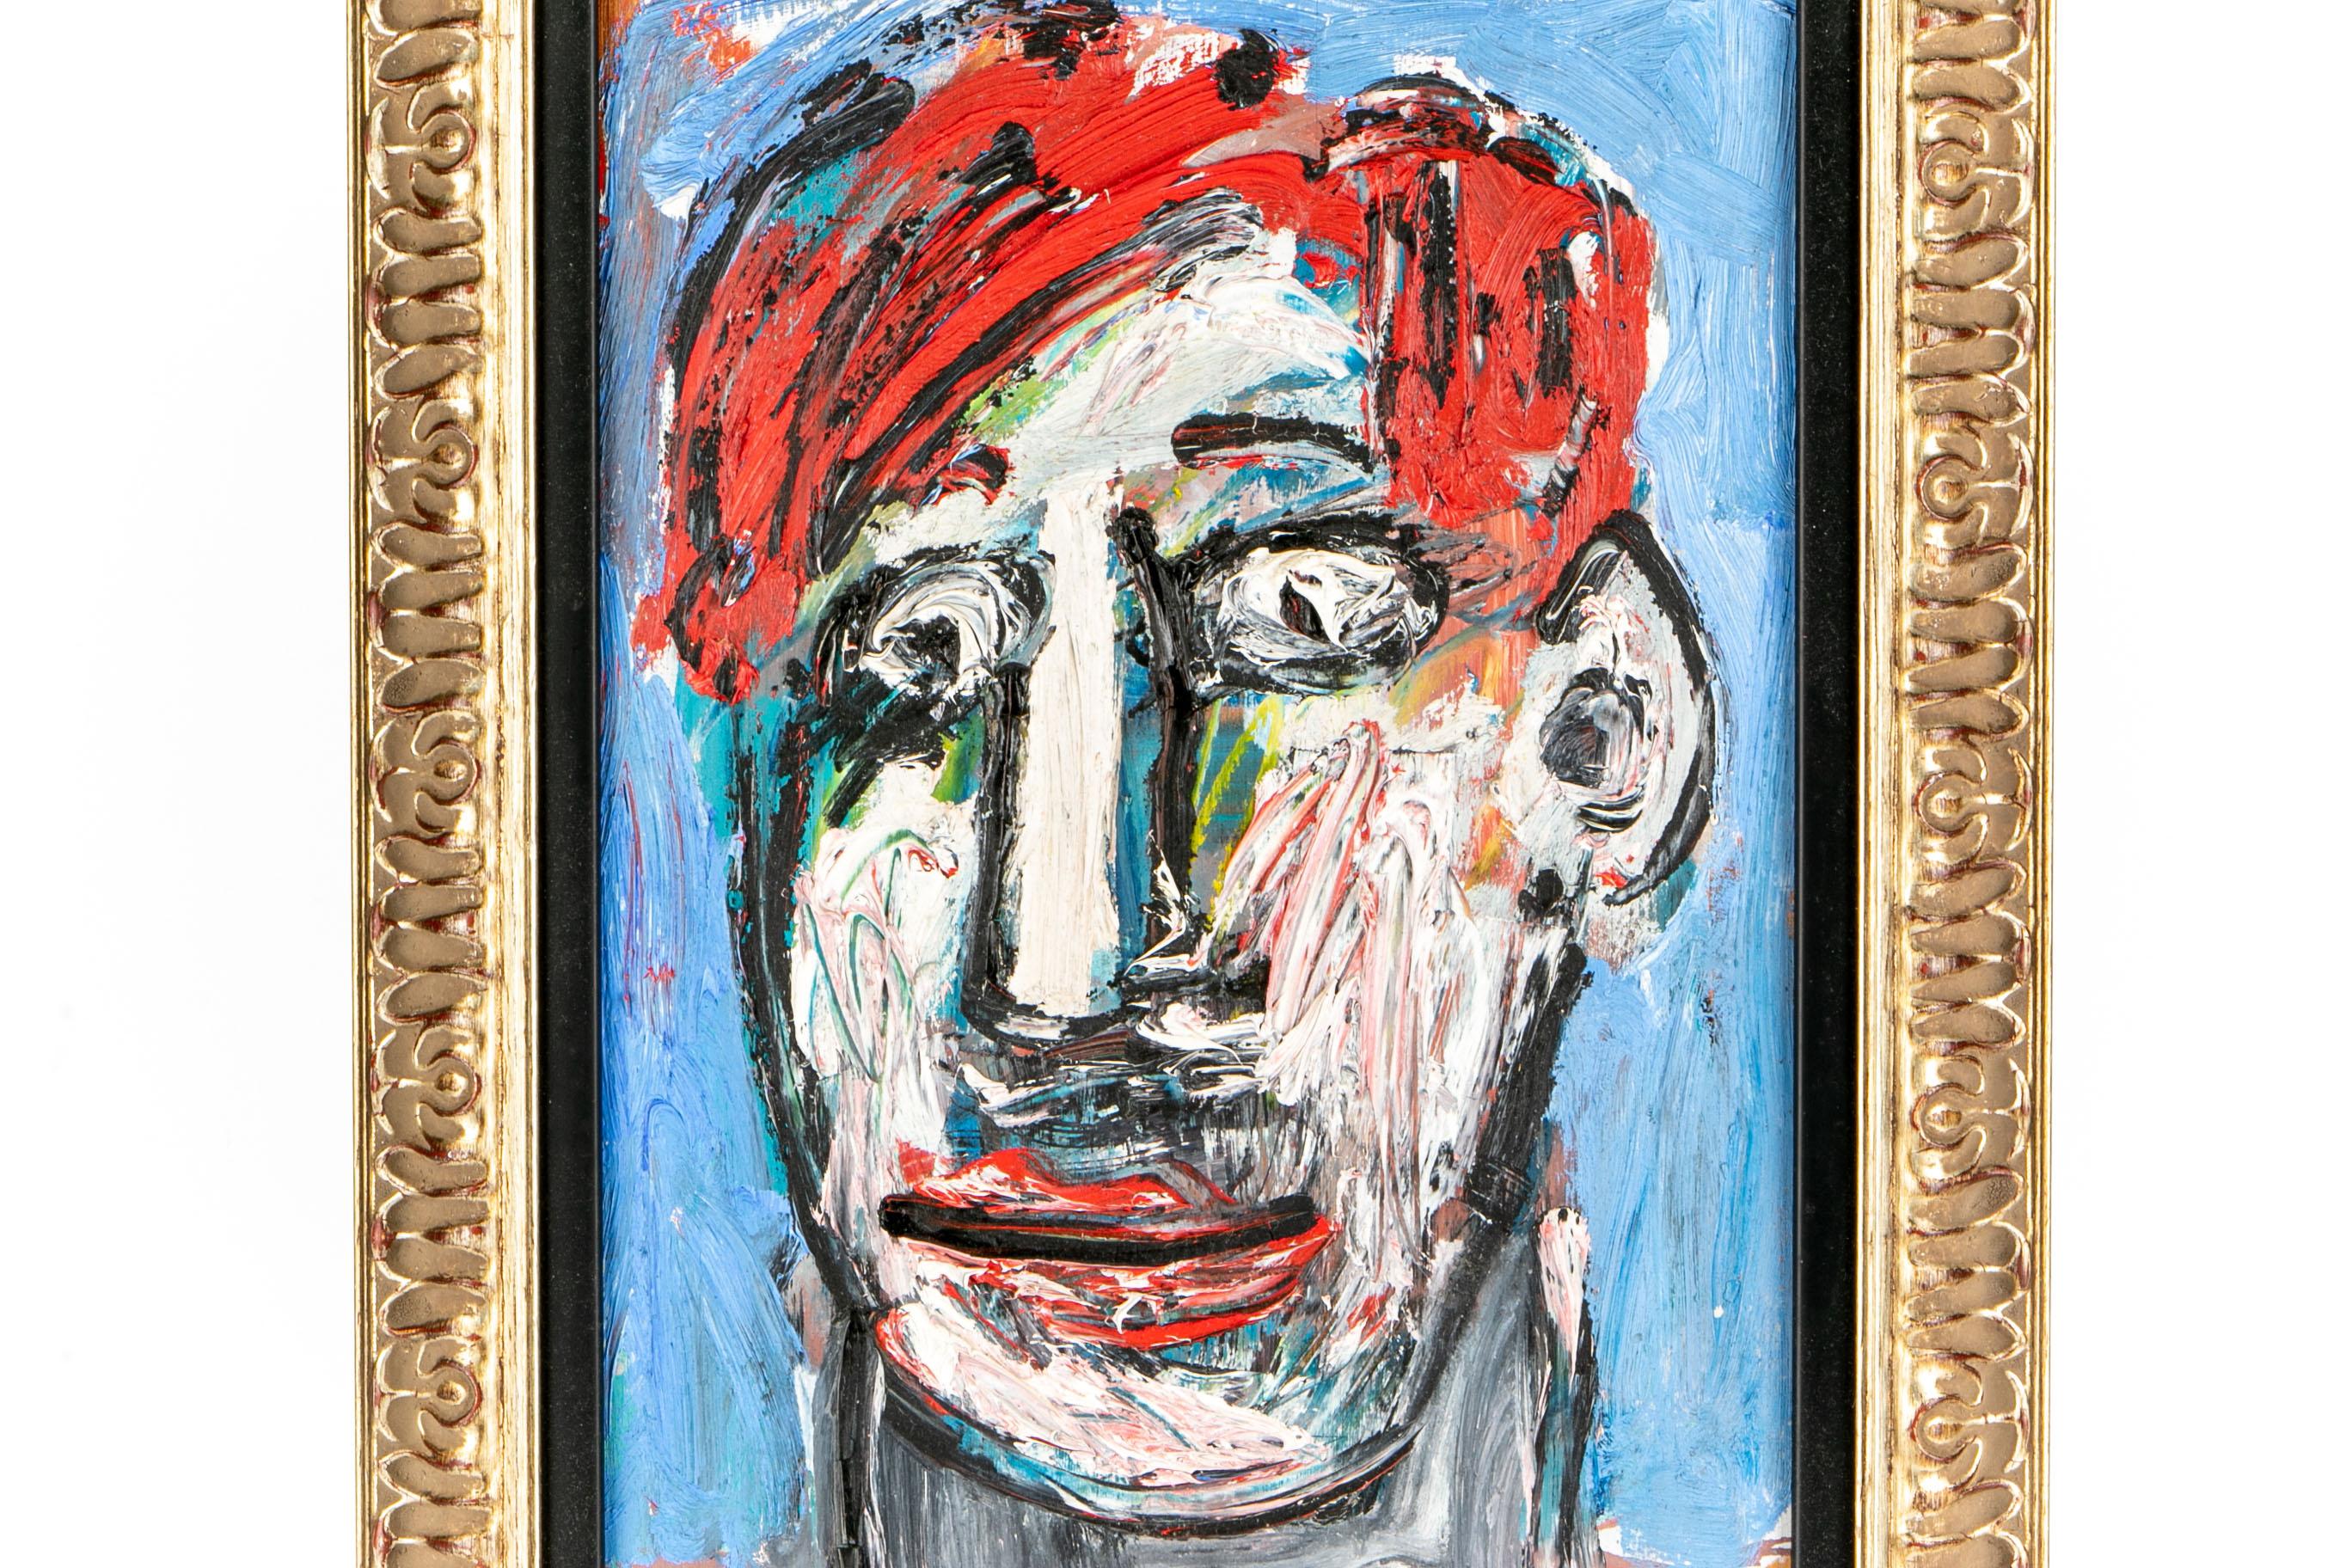 Alex Itin (American, 20th-21st century) contemporary acrylic on panel, portrait of a man. Signed and dated '96 on verso. A textured acrylic portrait of man with red hair. Mounted in a carved gilt frame. ss: 17 x 11